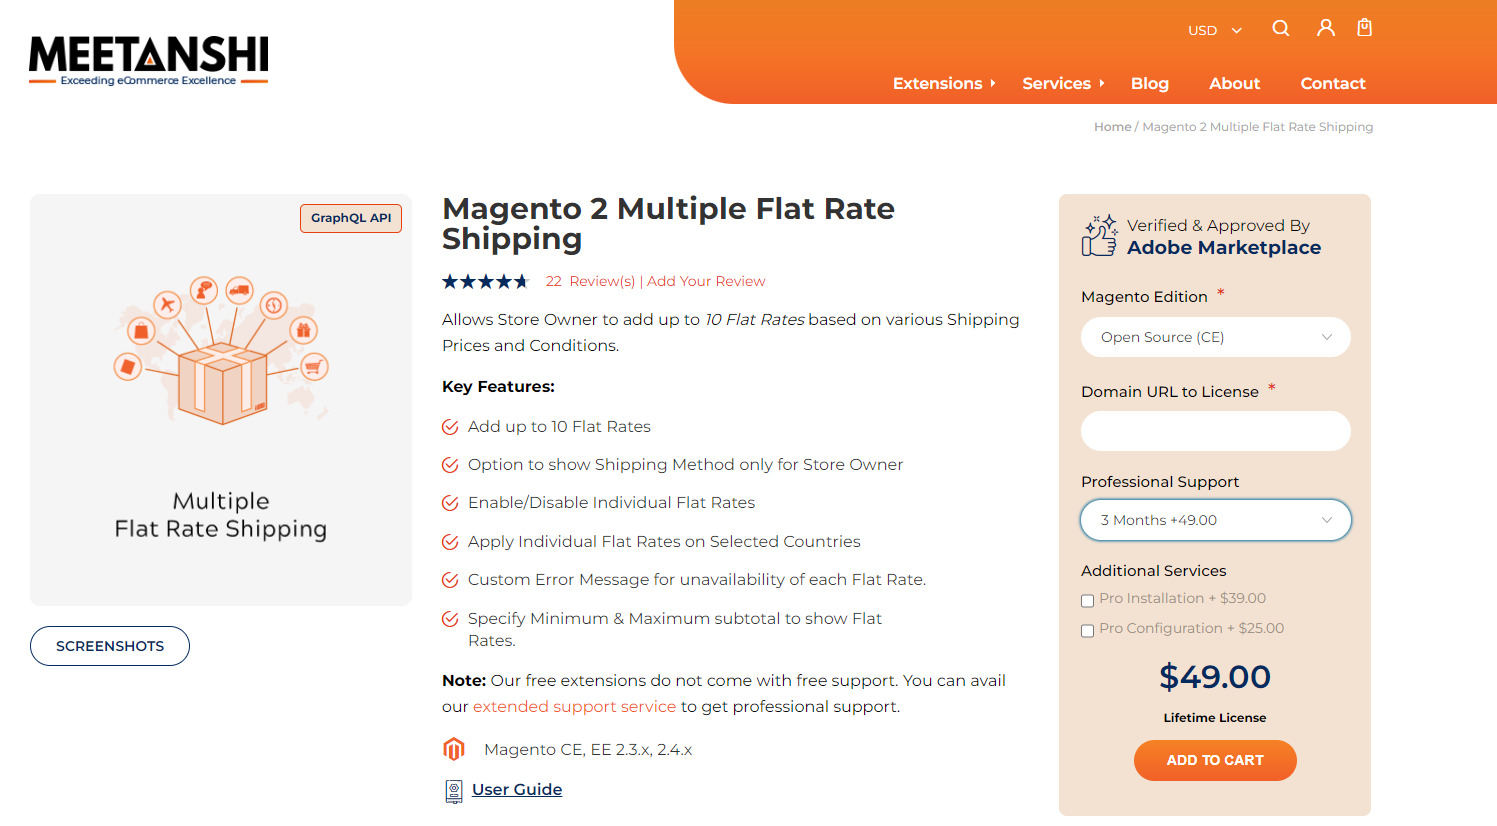 Magento 2 Multiple Flat Rate Shipping from Meetanshi